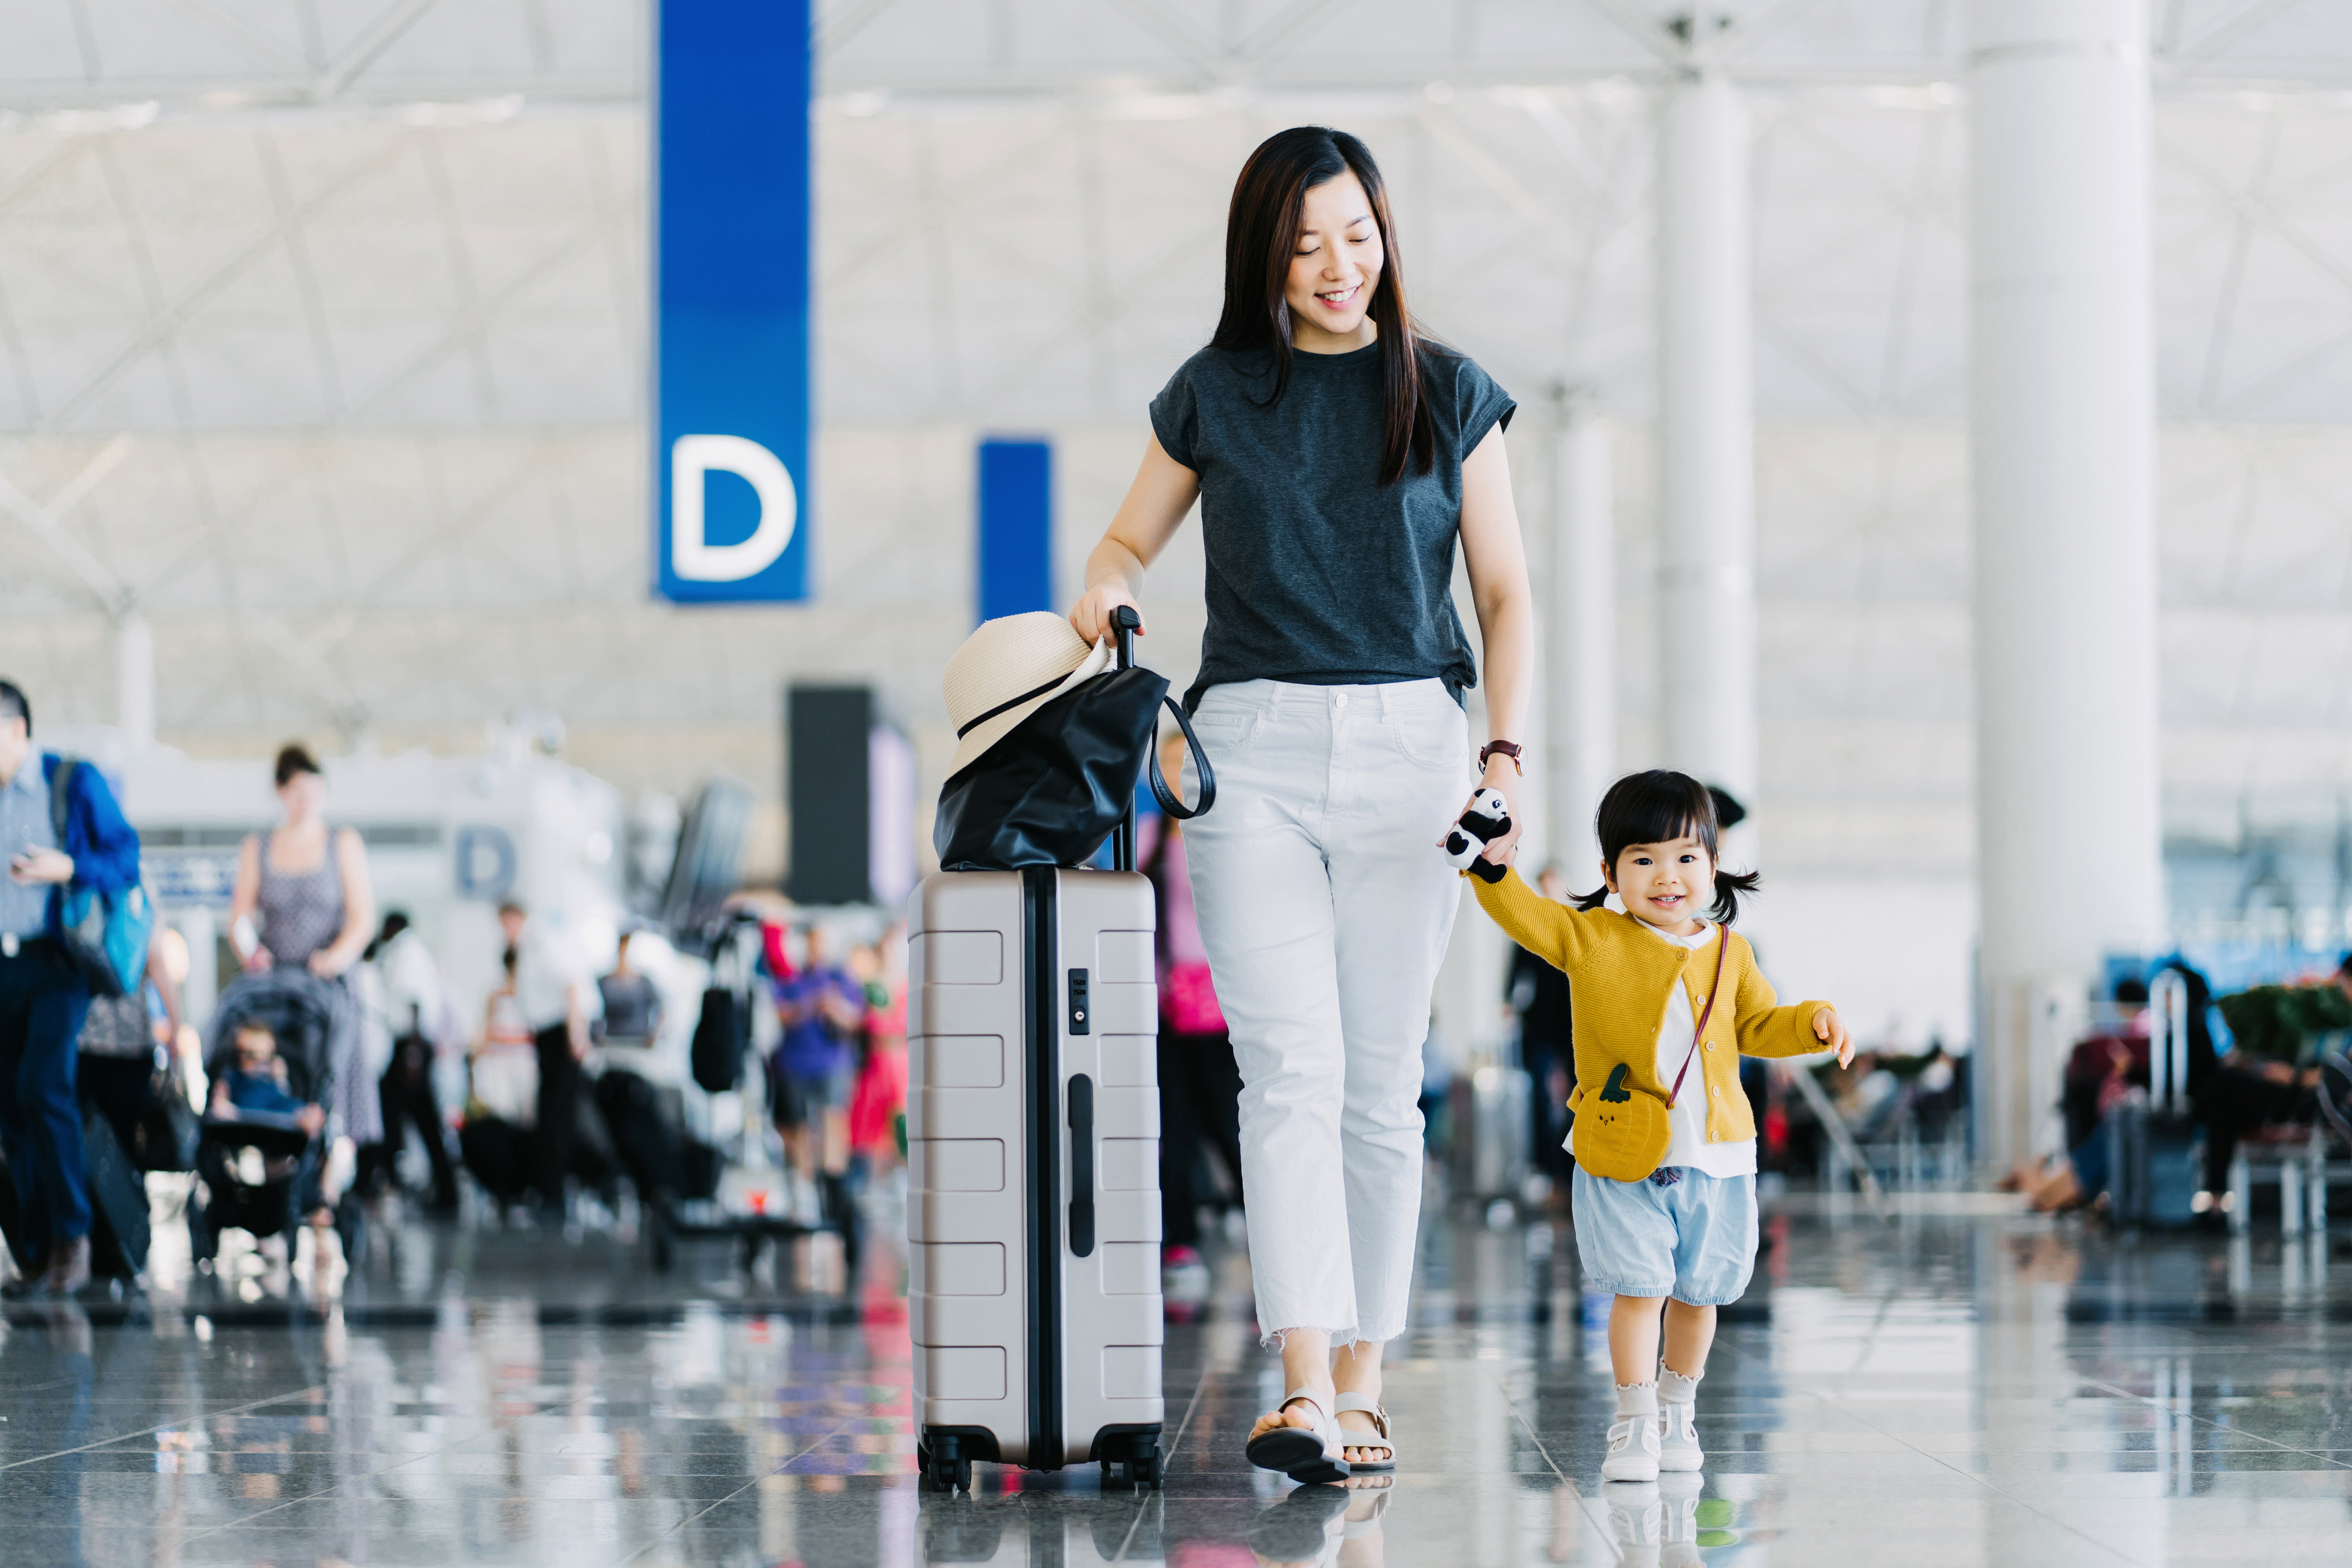 Woman and child walking in airport, holding hands, child smiling and carrying a small backpack